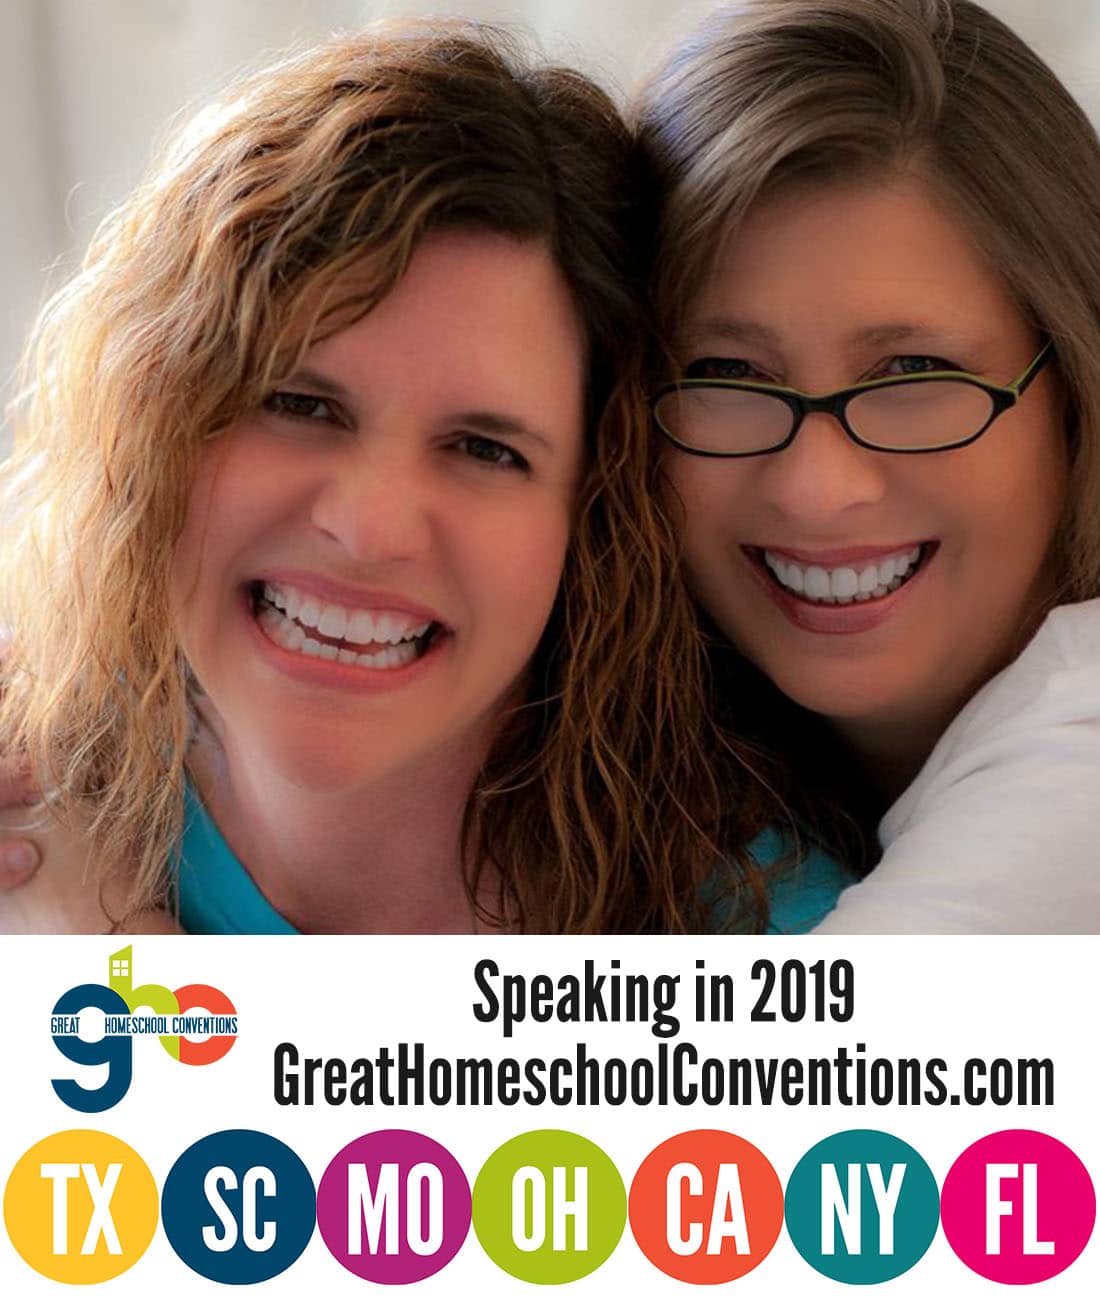 What Is GREAT About Great Homeschool Conventions?